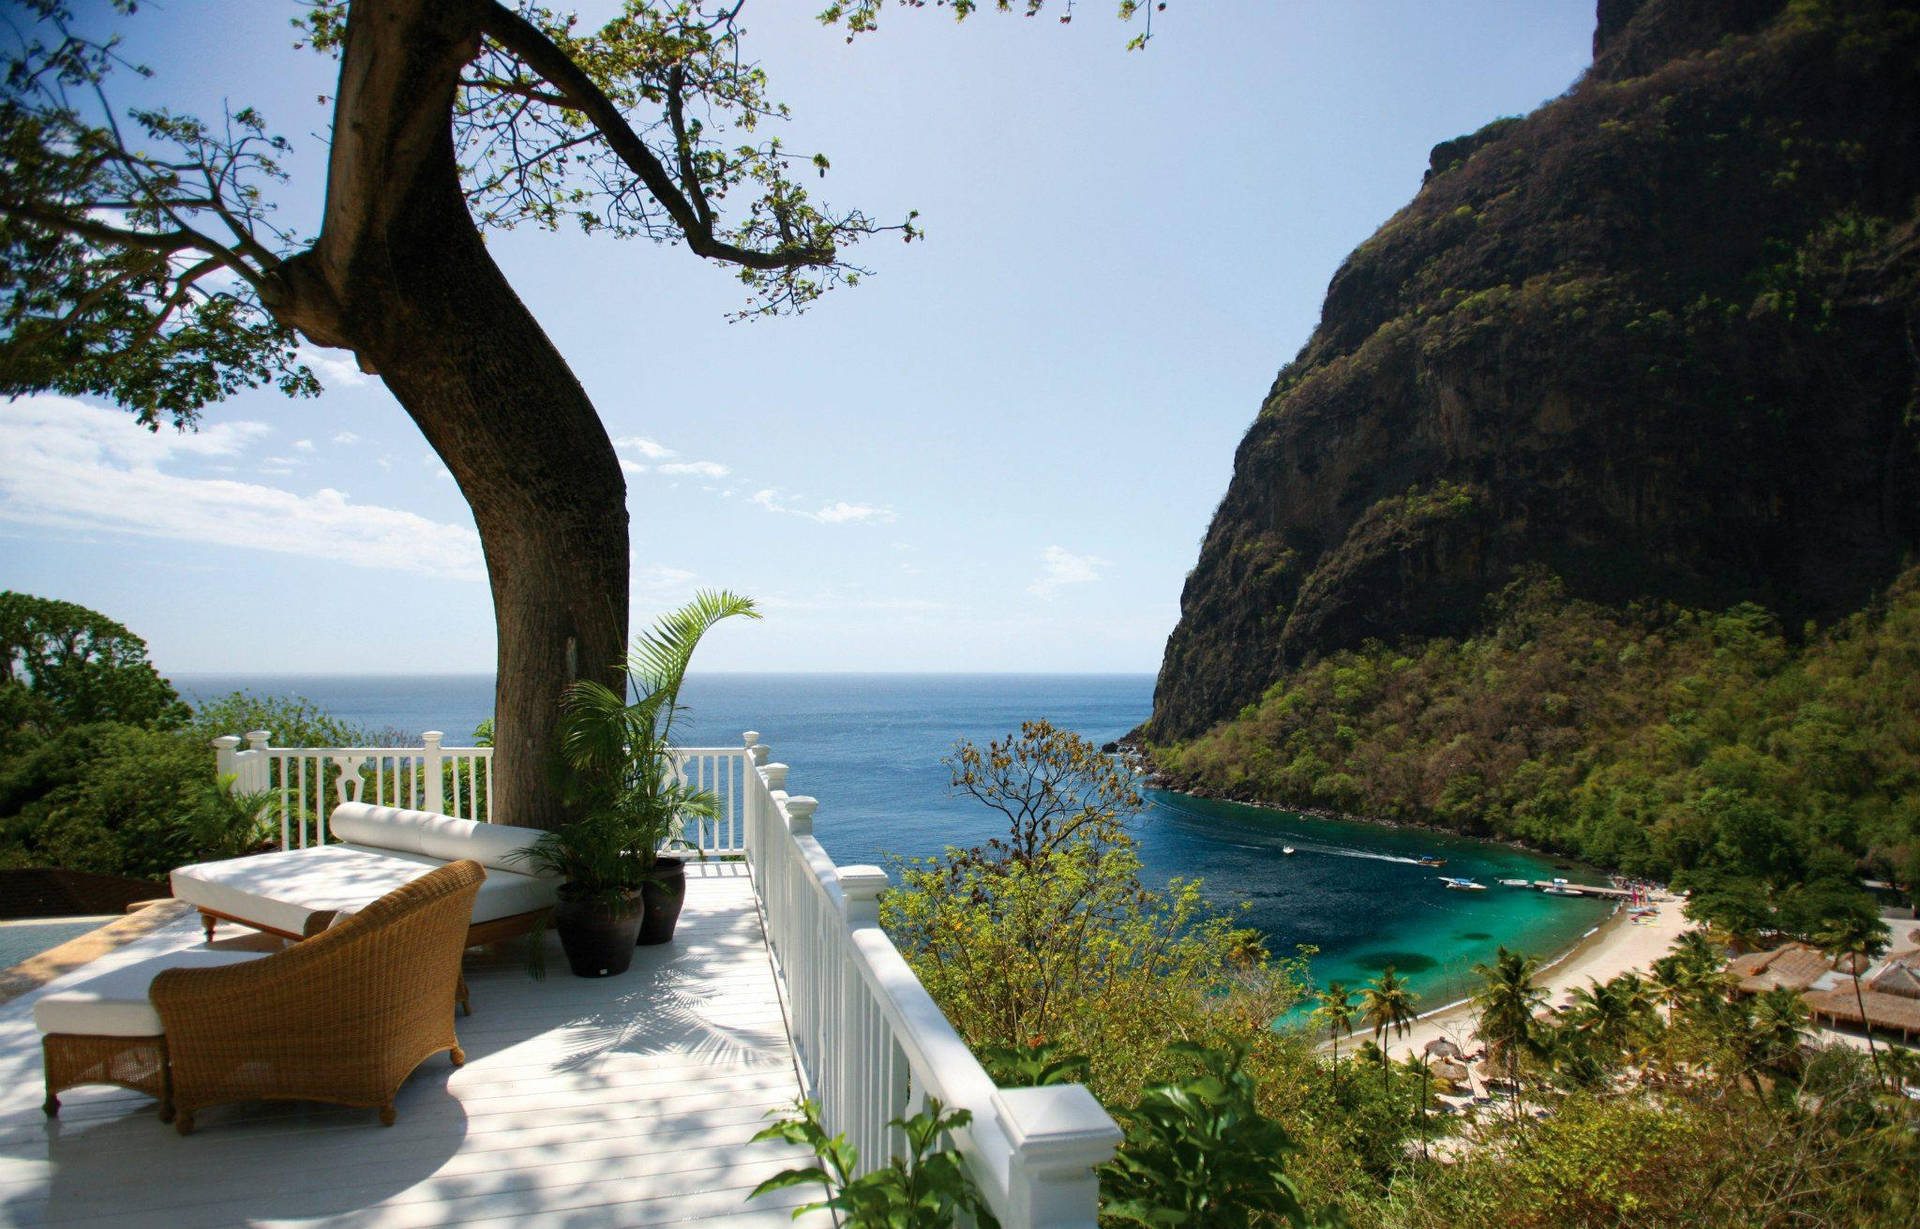 St. Lucia Porch Overlooking The Sea Wallpaper